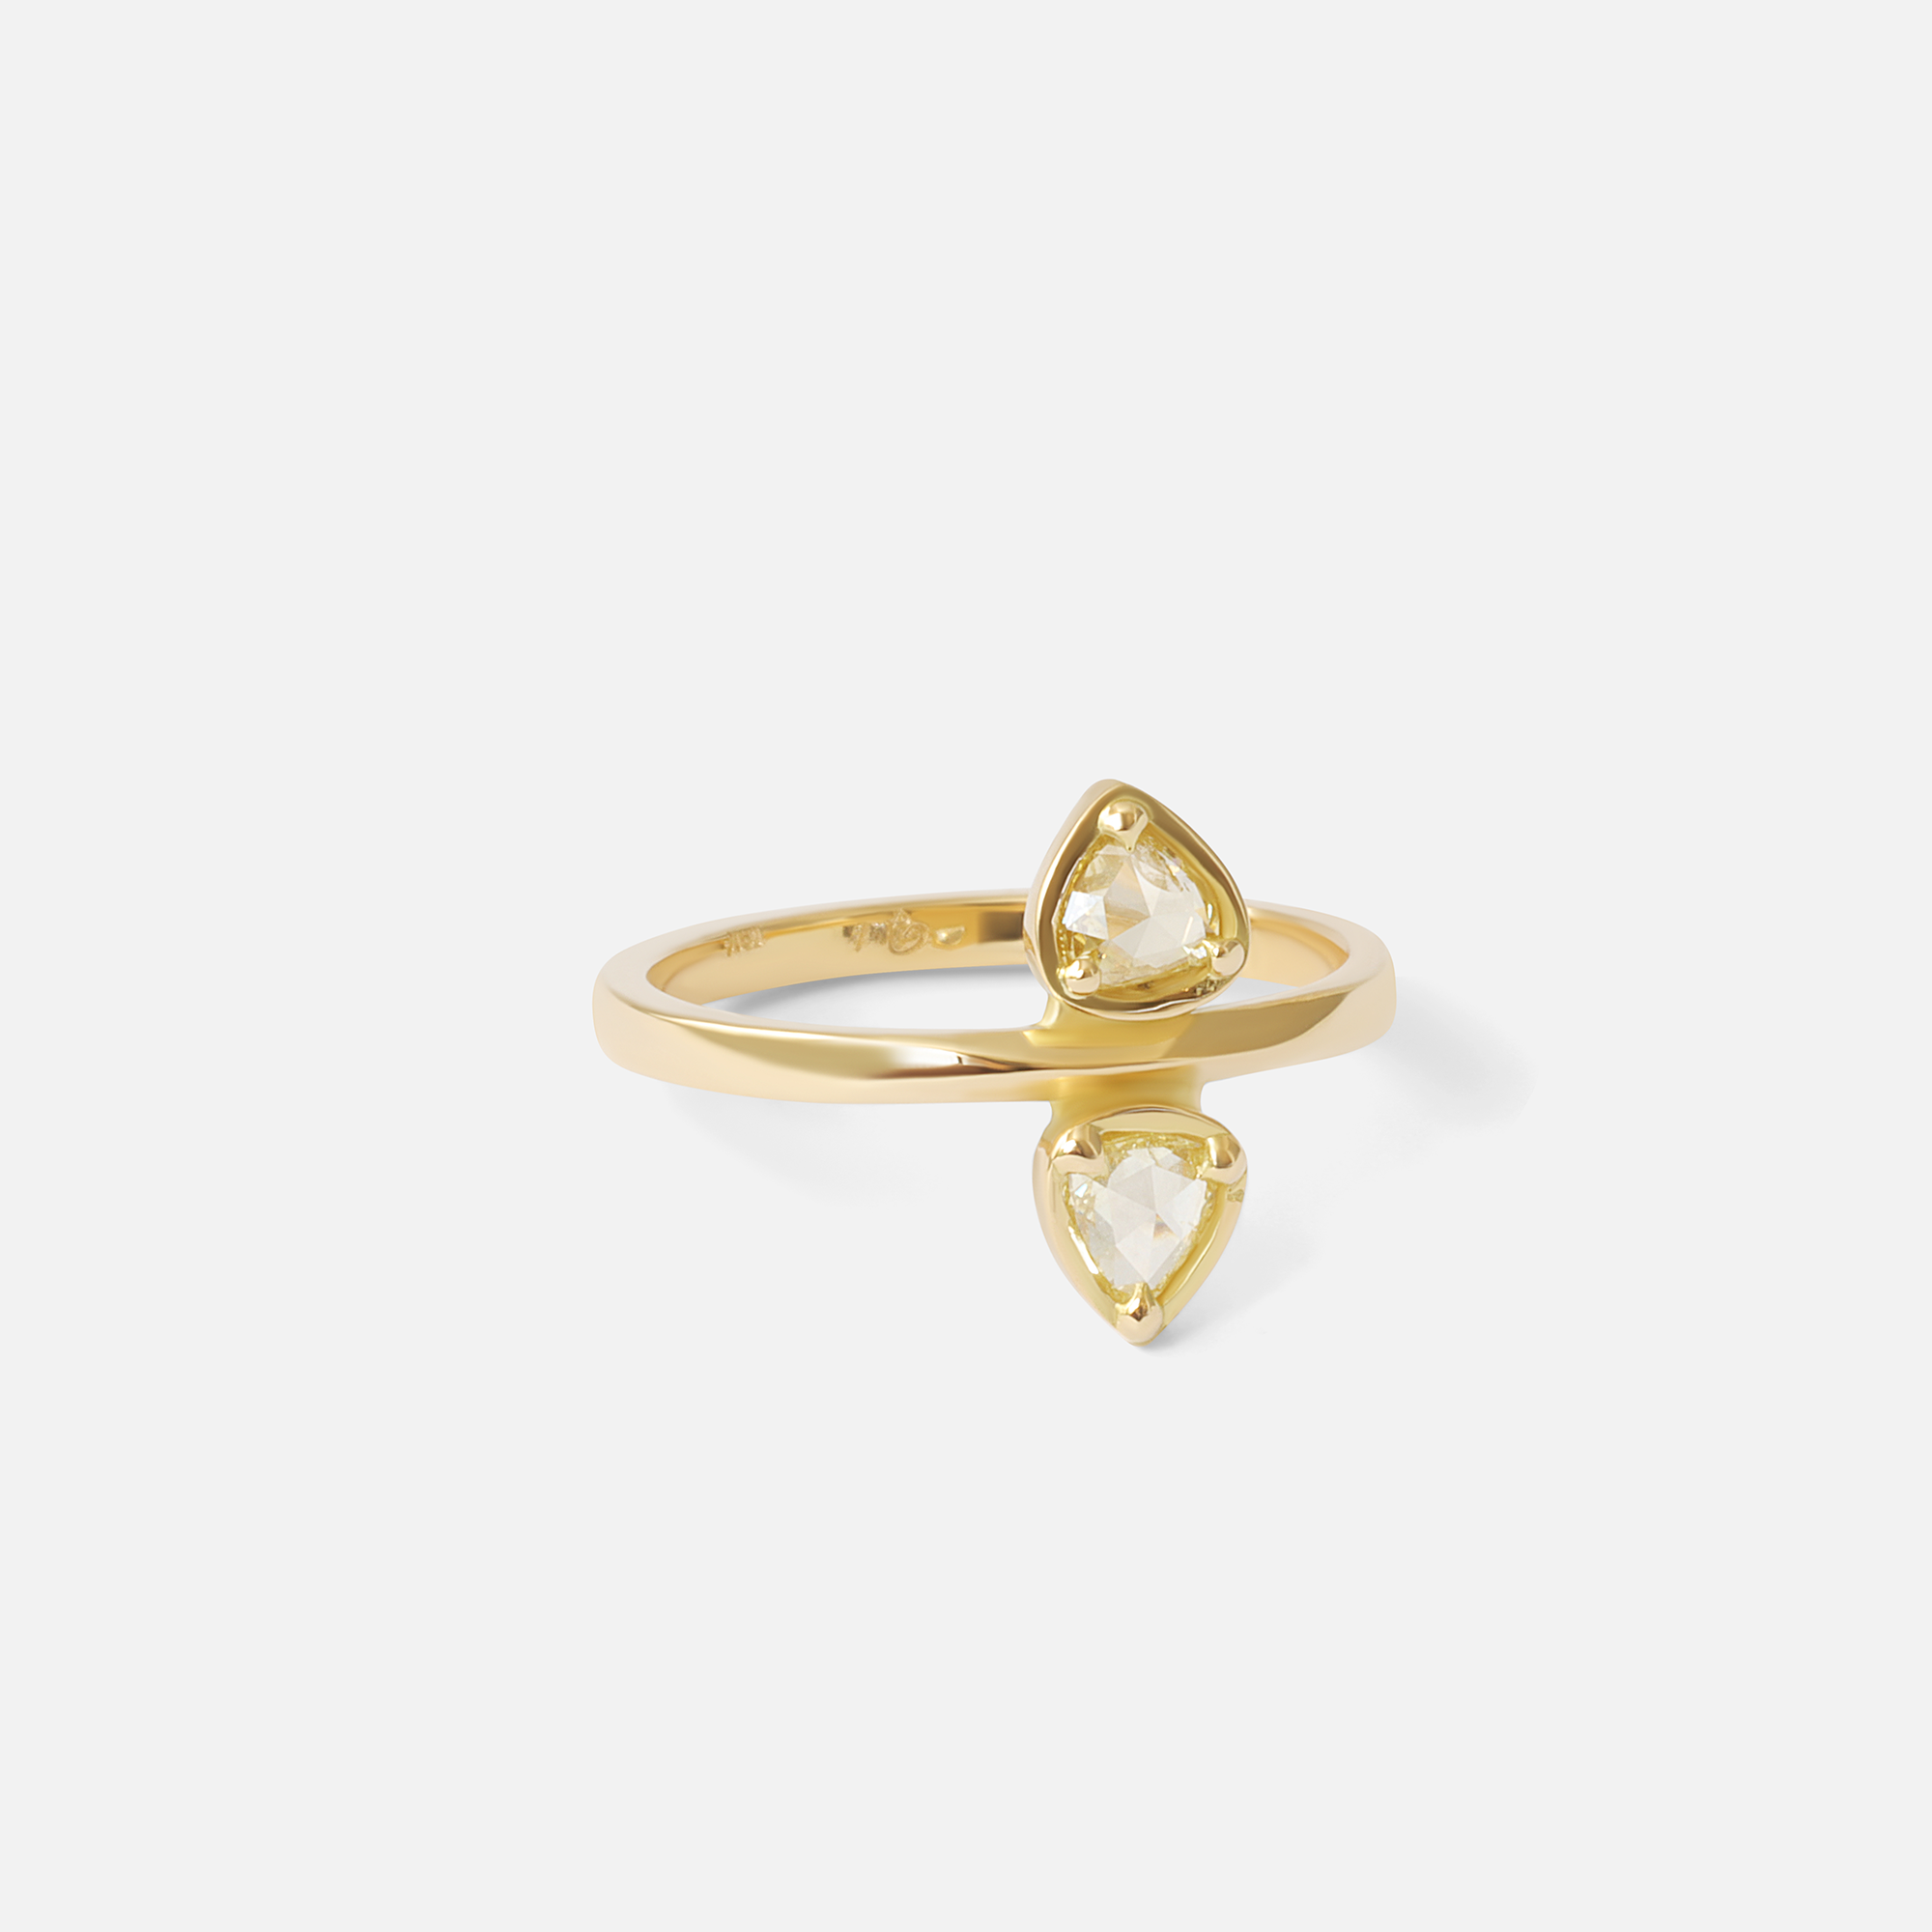 Toi Et Moi / 0.4ct Yellow Heart Diamond Ring By fitzgerald jewelry in rings Category